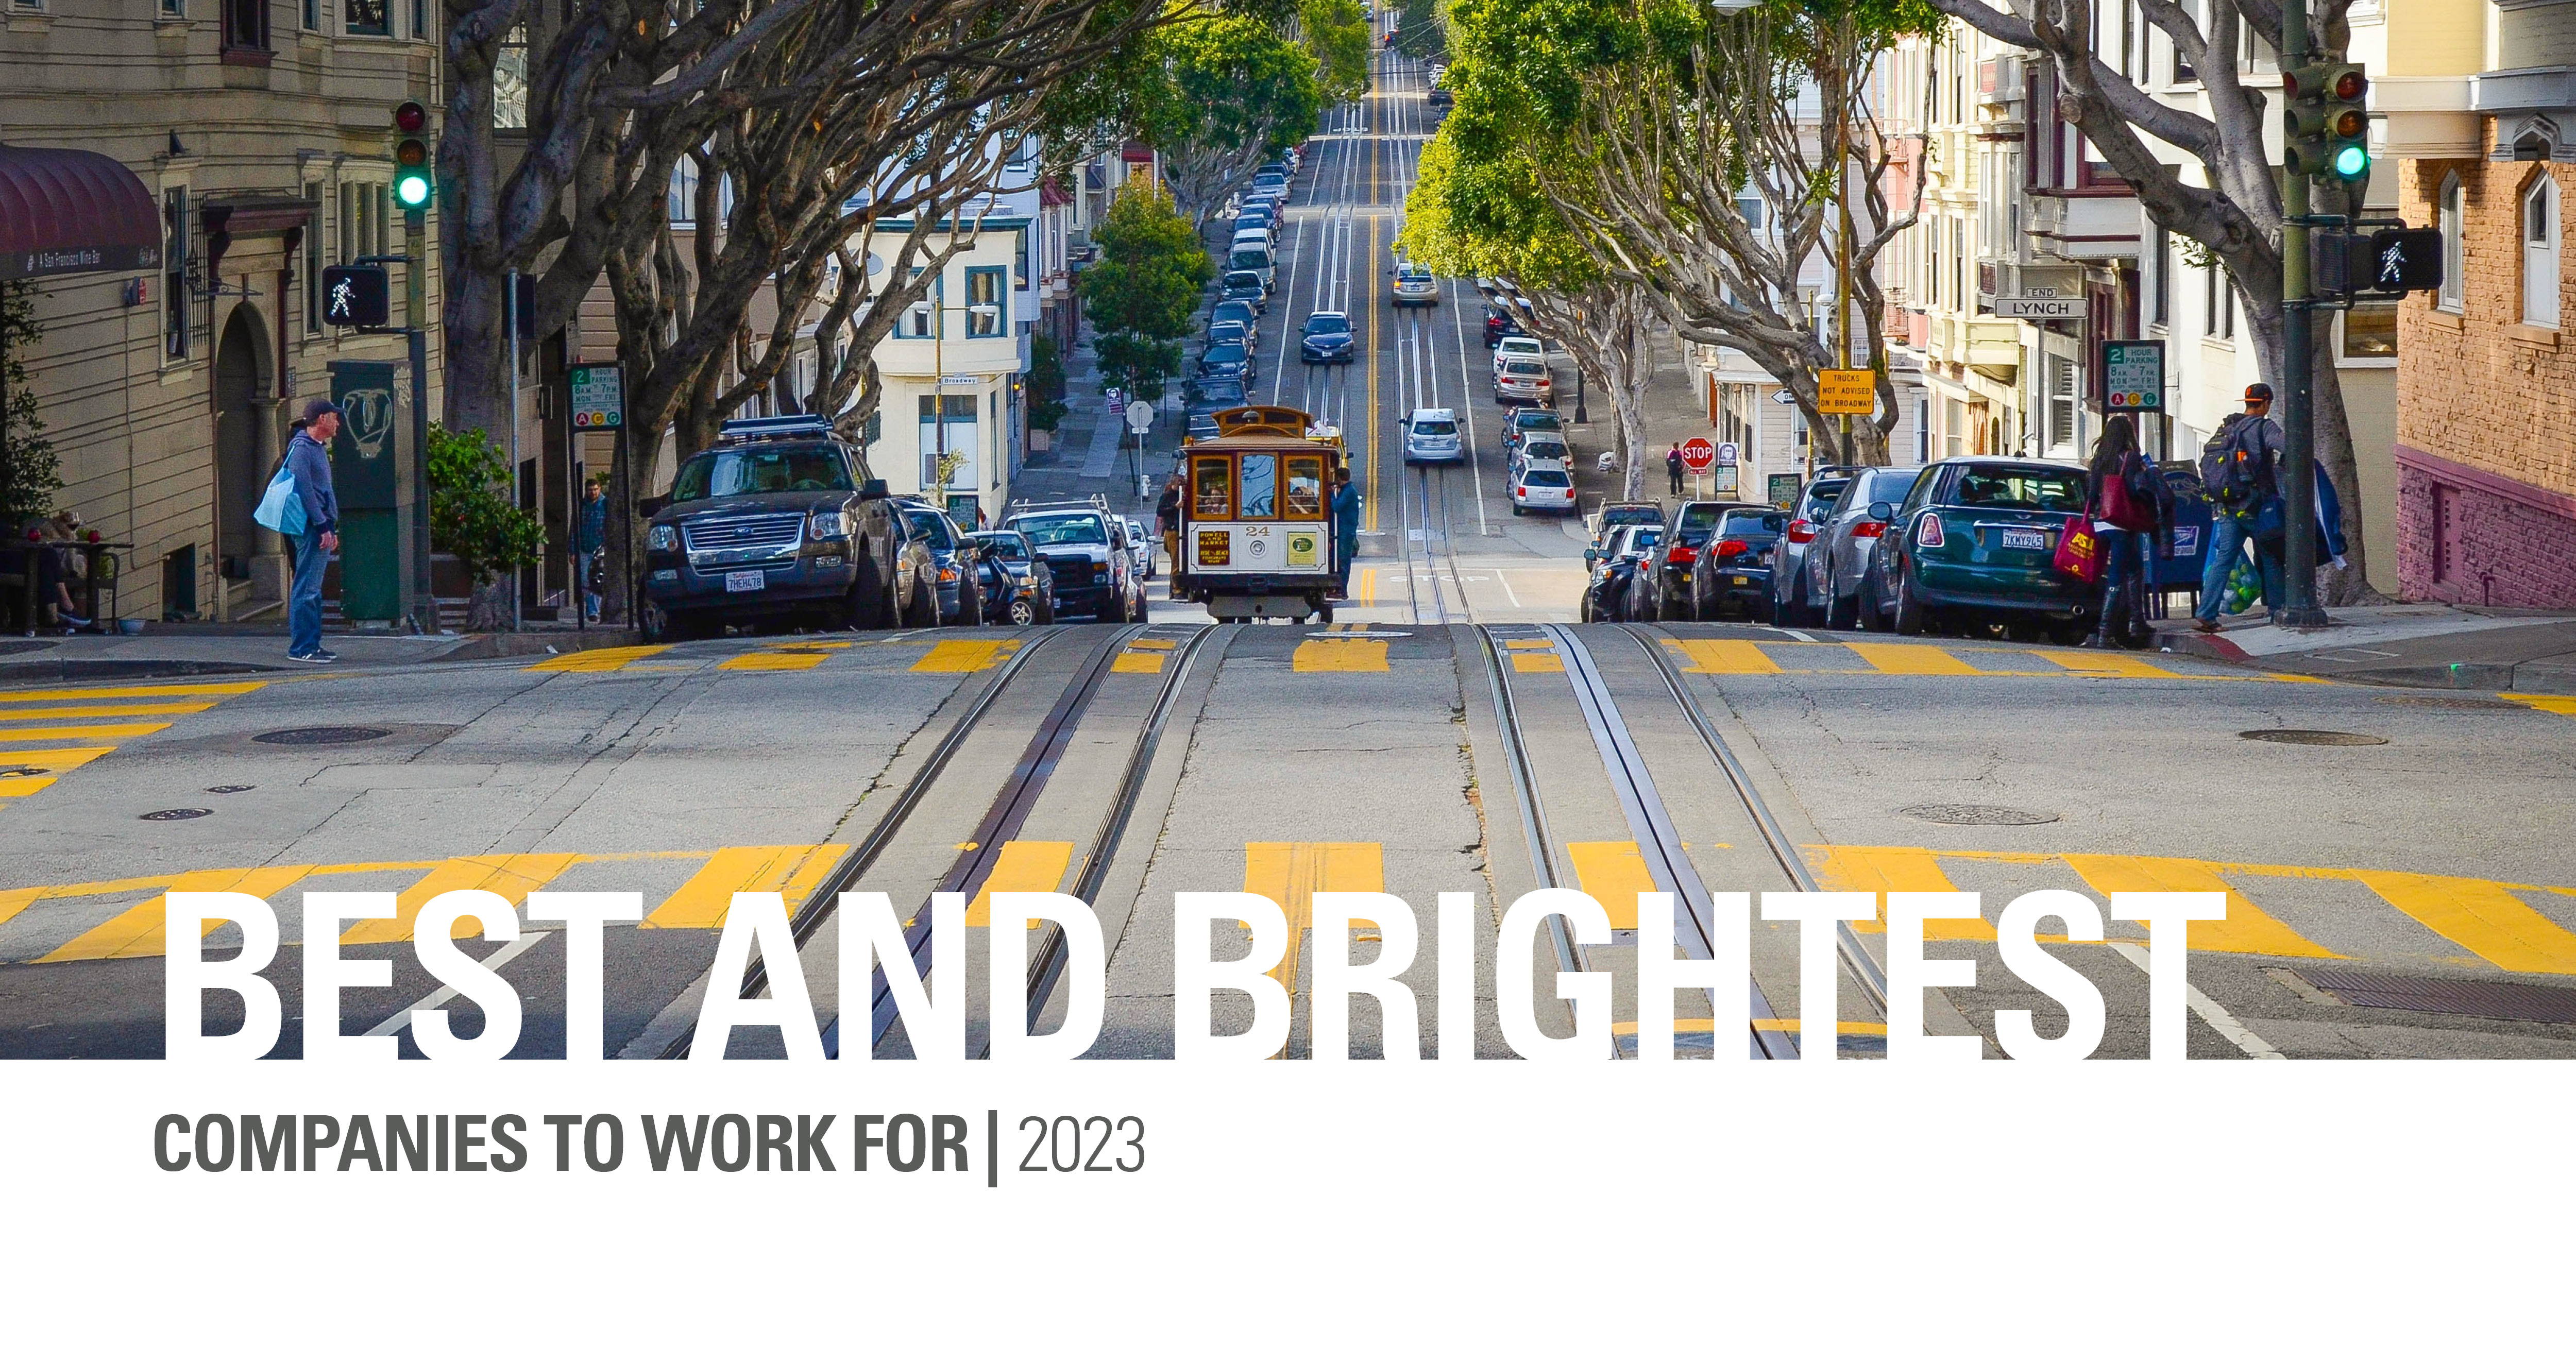 /San%20Francisco%20street%2C%20with%20text%20Best%20and%20Brightest%20companies%20to%20work%20for%20%7C%202023%20below.%20